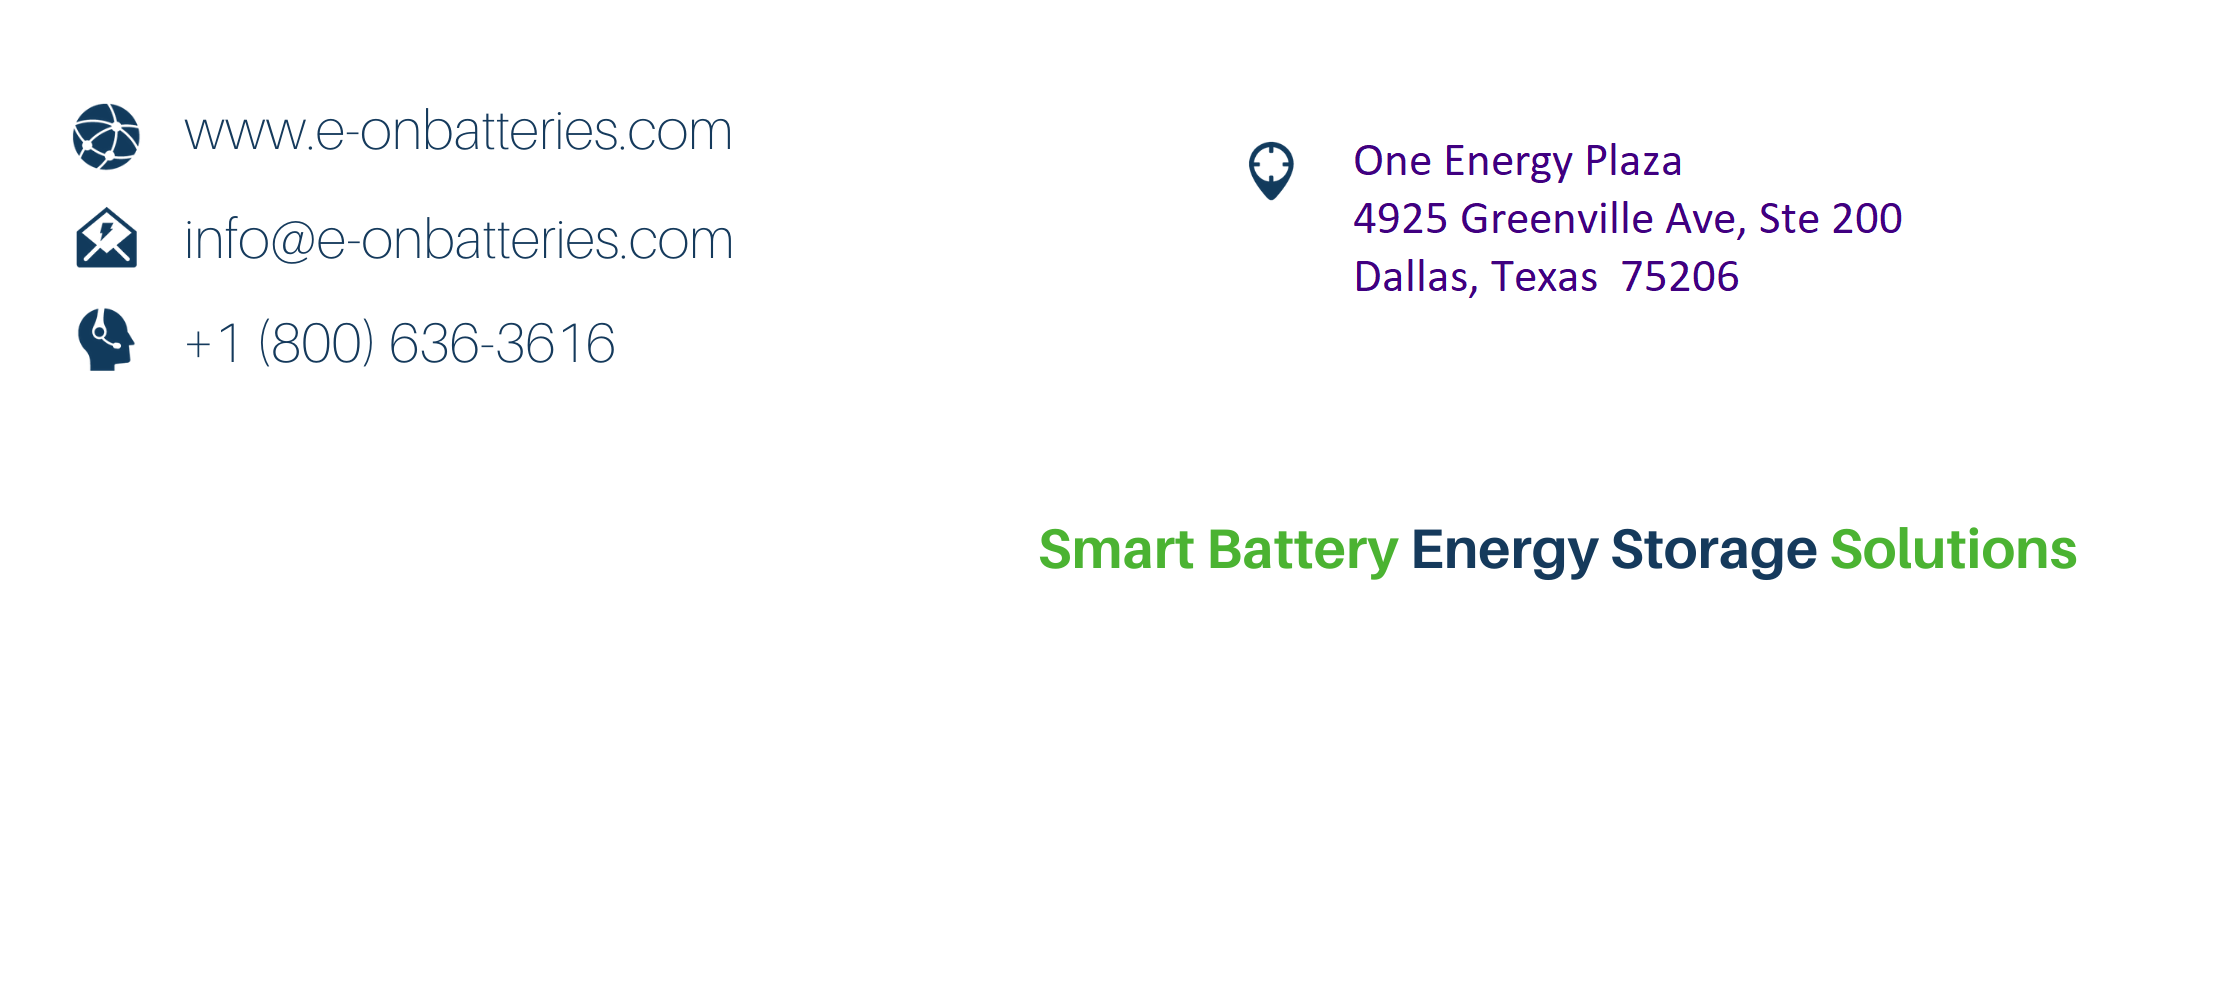 e-On Batteries contact us via email, phone, or mail